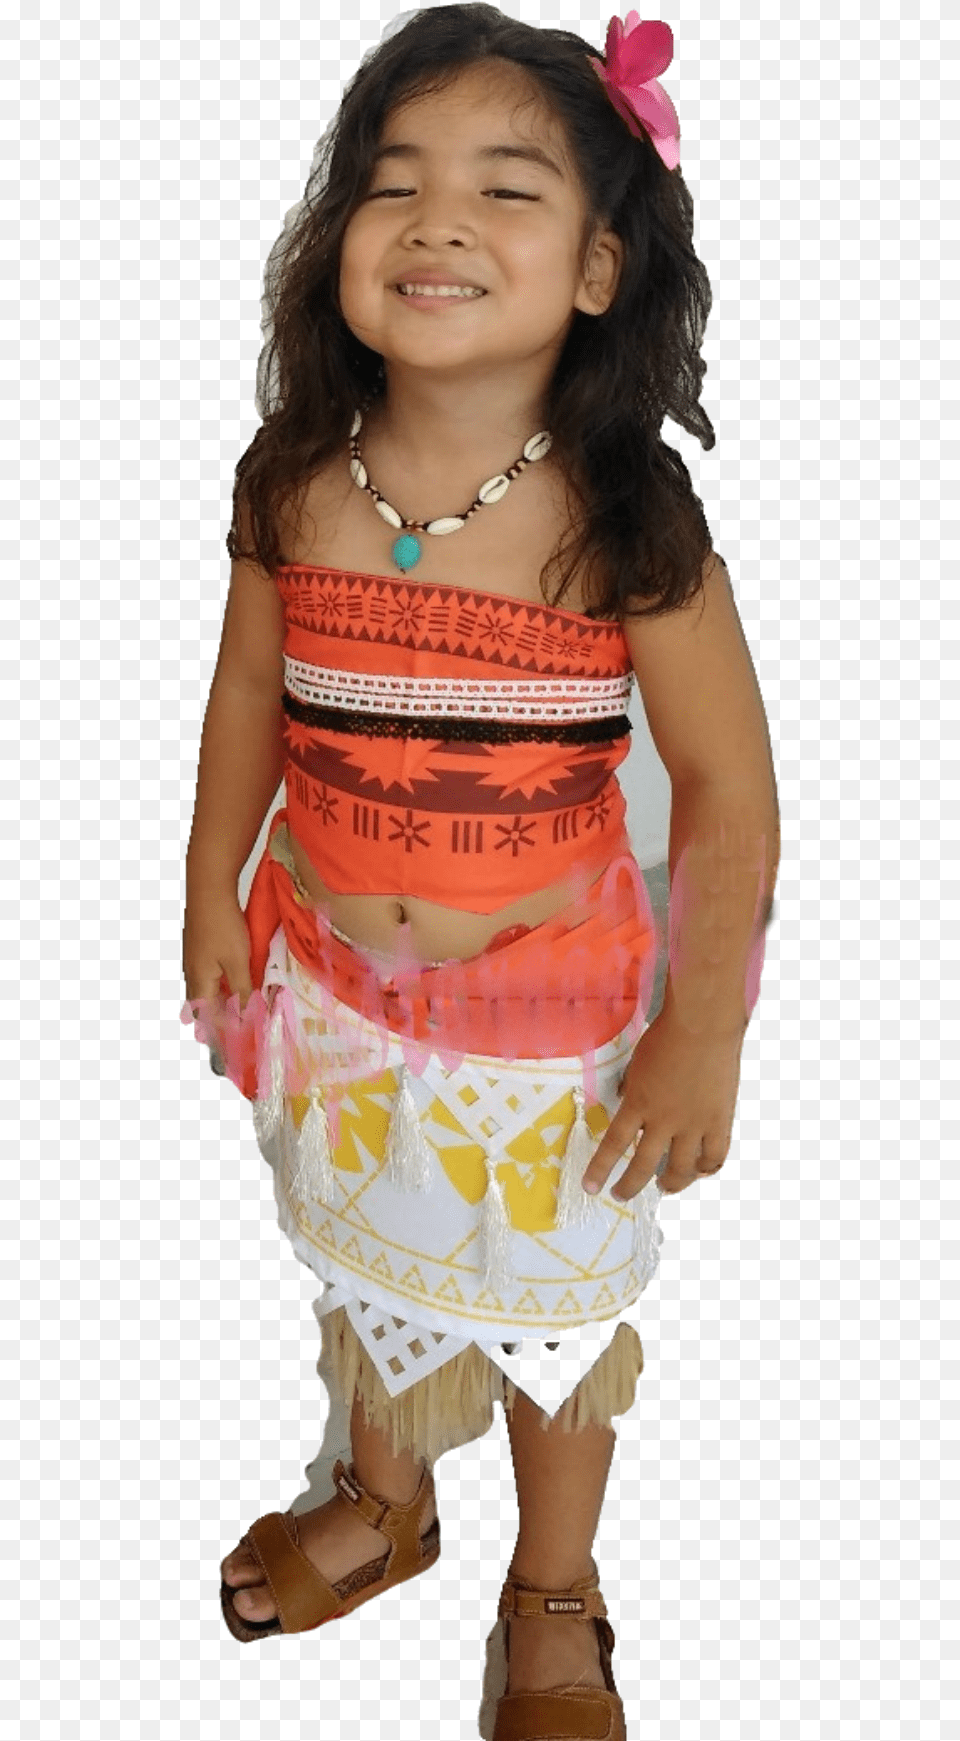 Moana Costume Toddler, Clothing, Sandal, Footwear, Person Png Image